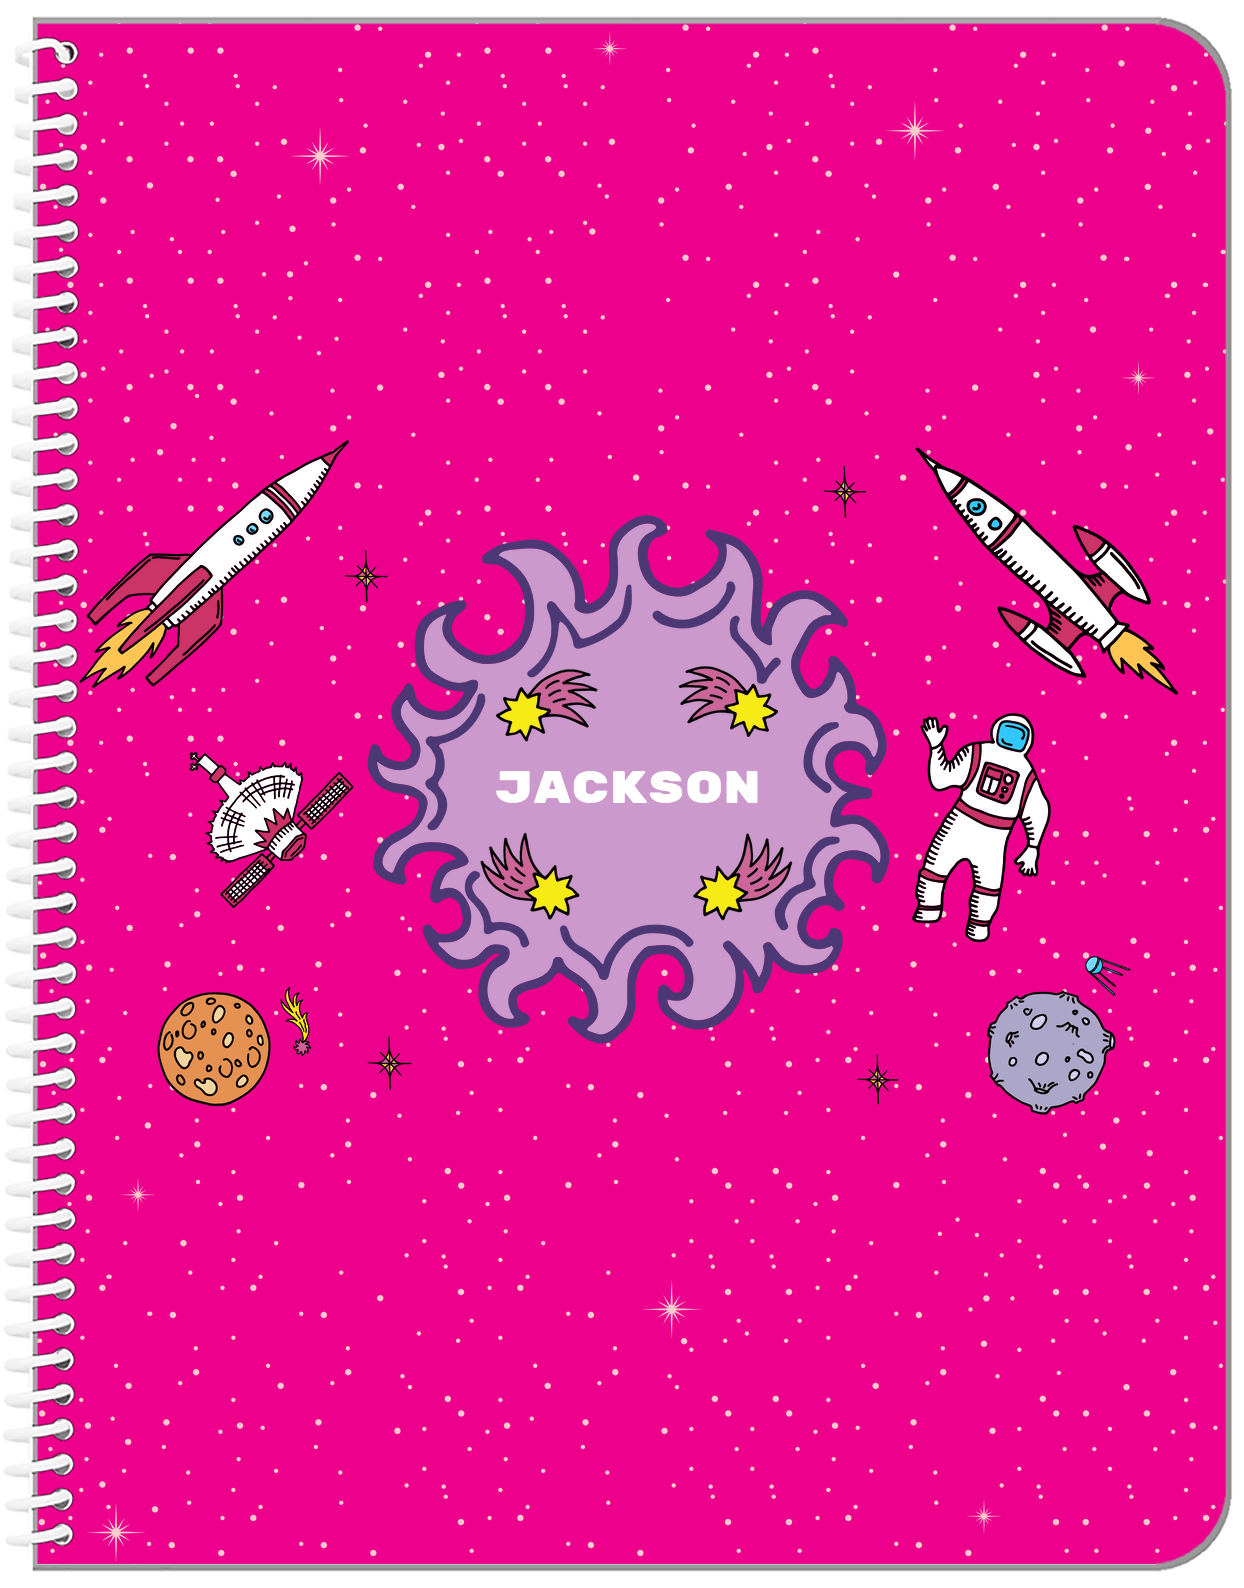 Personalized Rocket Ship Notebook V - Fireball Galaxy - Pink Background - Front View